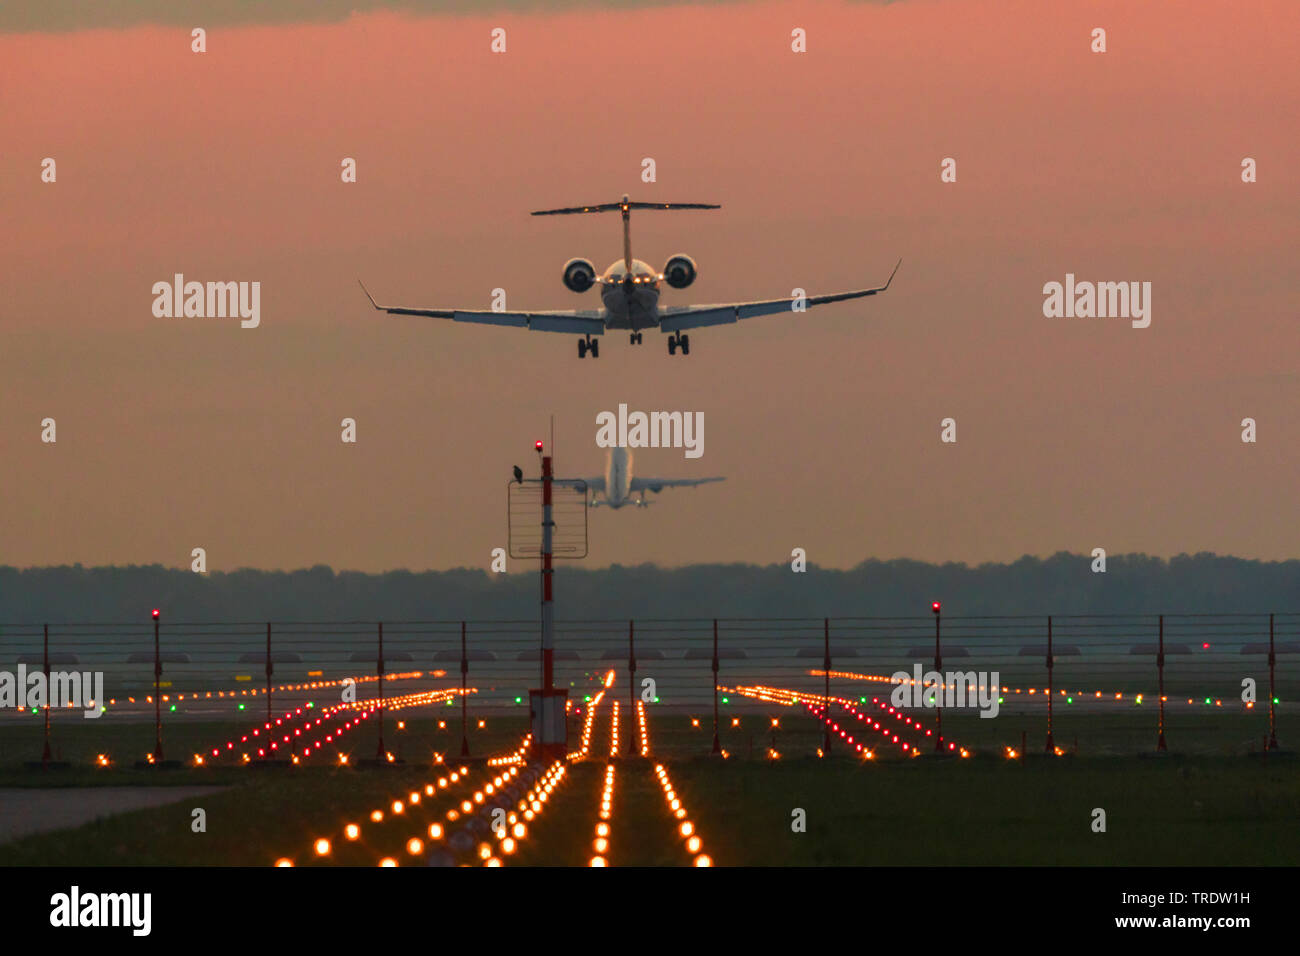 Bombardier CR900 landing in evening light, Germany, Bavaria, Muenchen Stock Photo